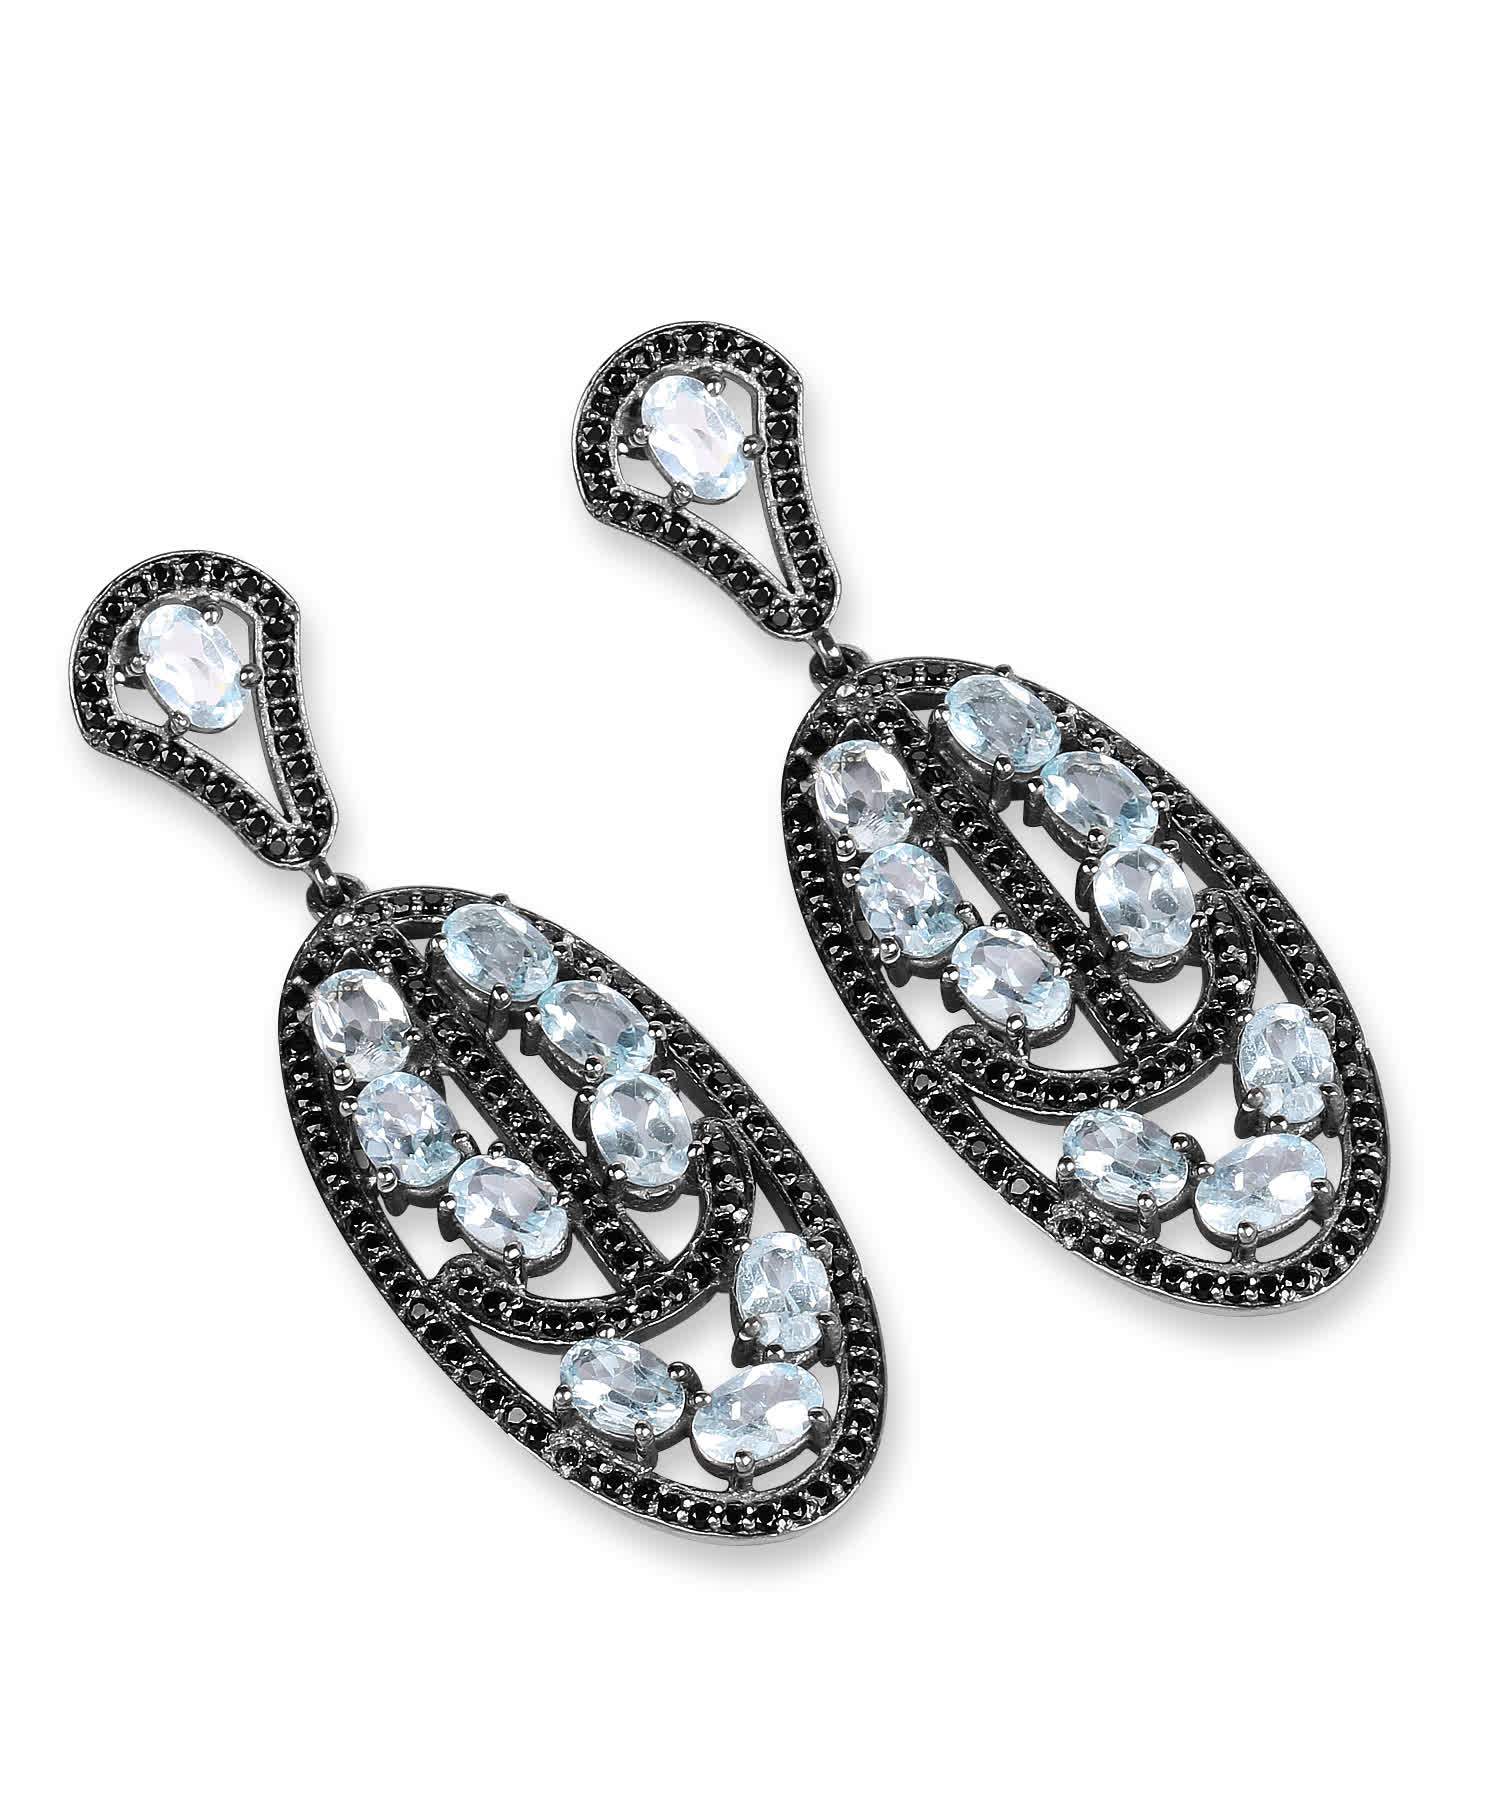 13.80ctw Natural Sky Blue Topaz and Black Spinel Rhodium Plated 925 Sterling Silver Antique Style Dangle Earrings View 3